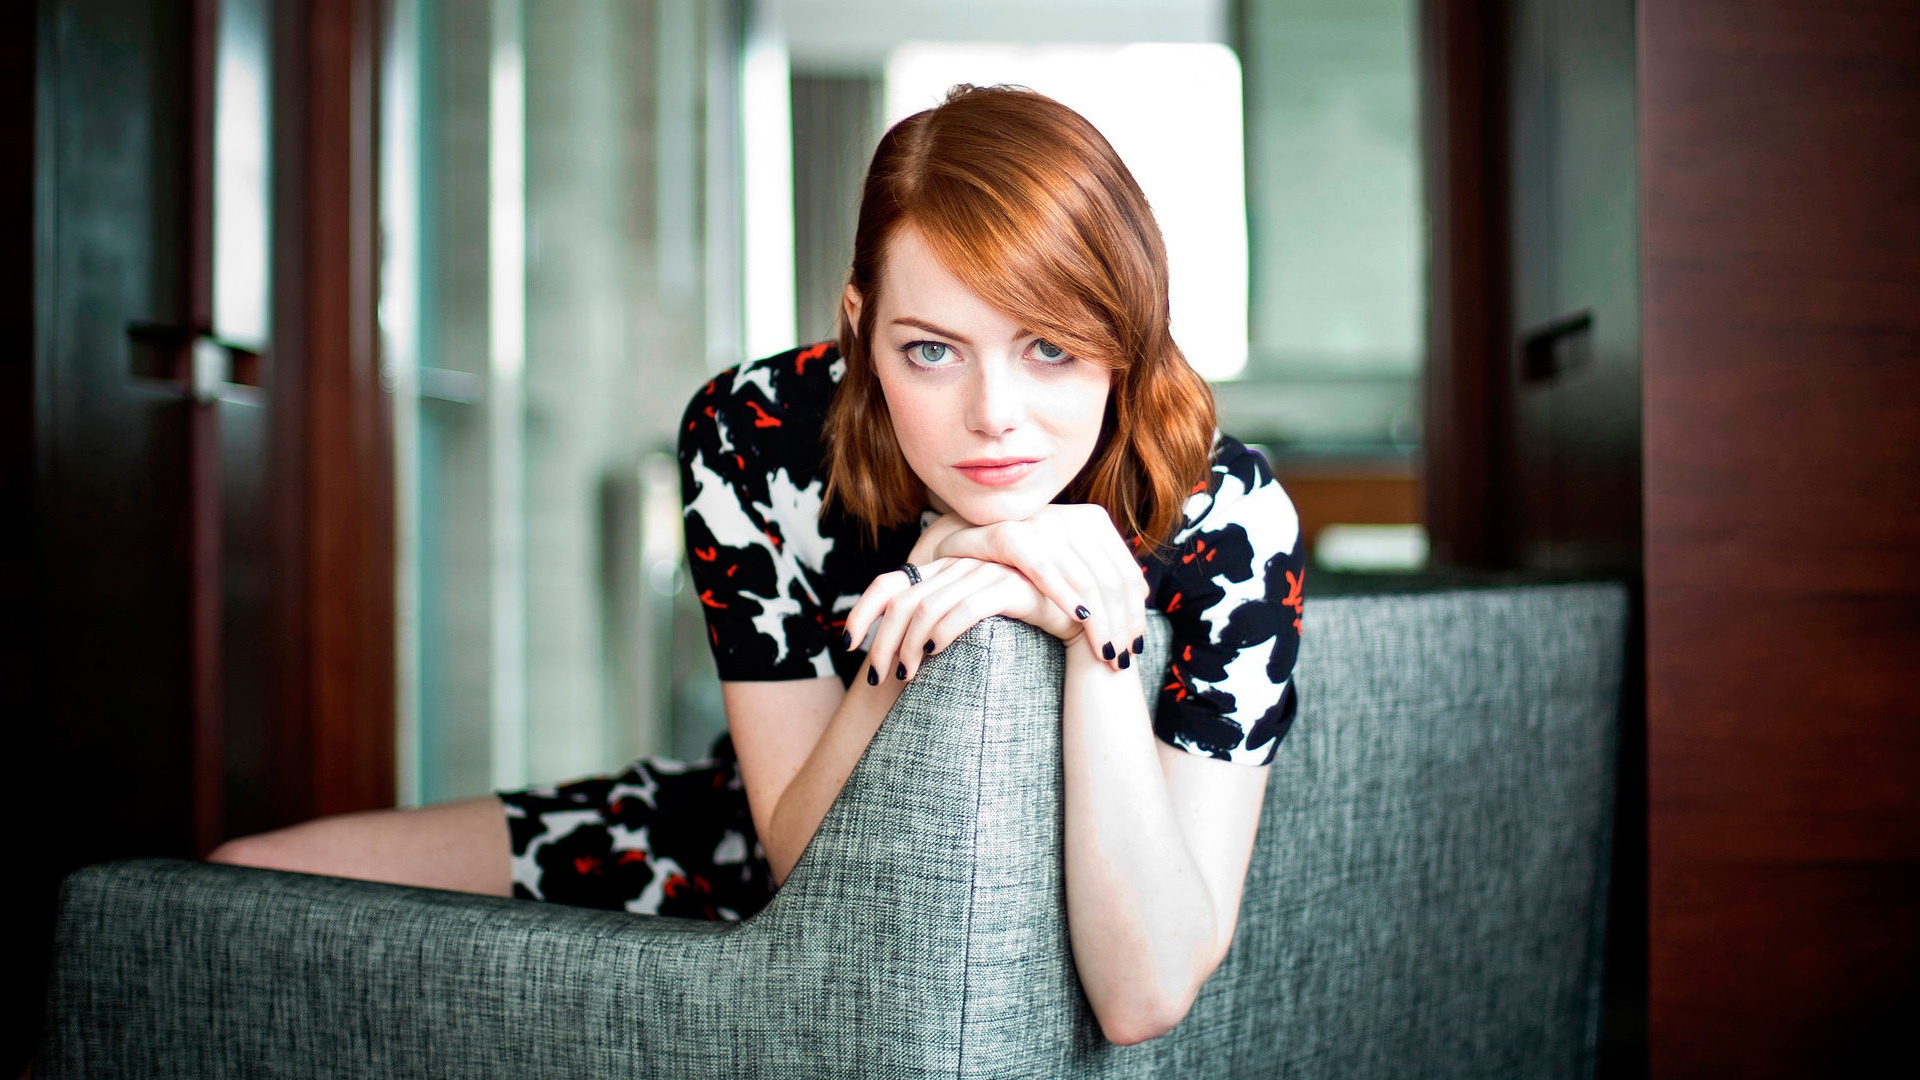 emma stone 2015 wallpapers in jpg format for free download